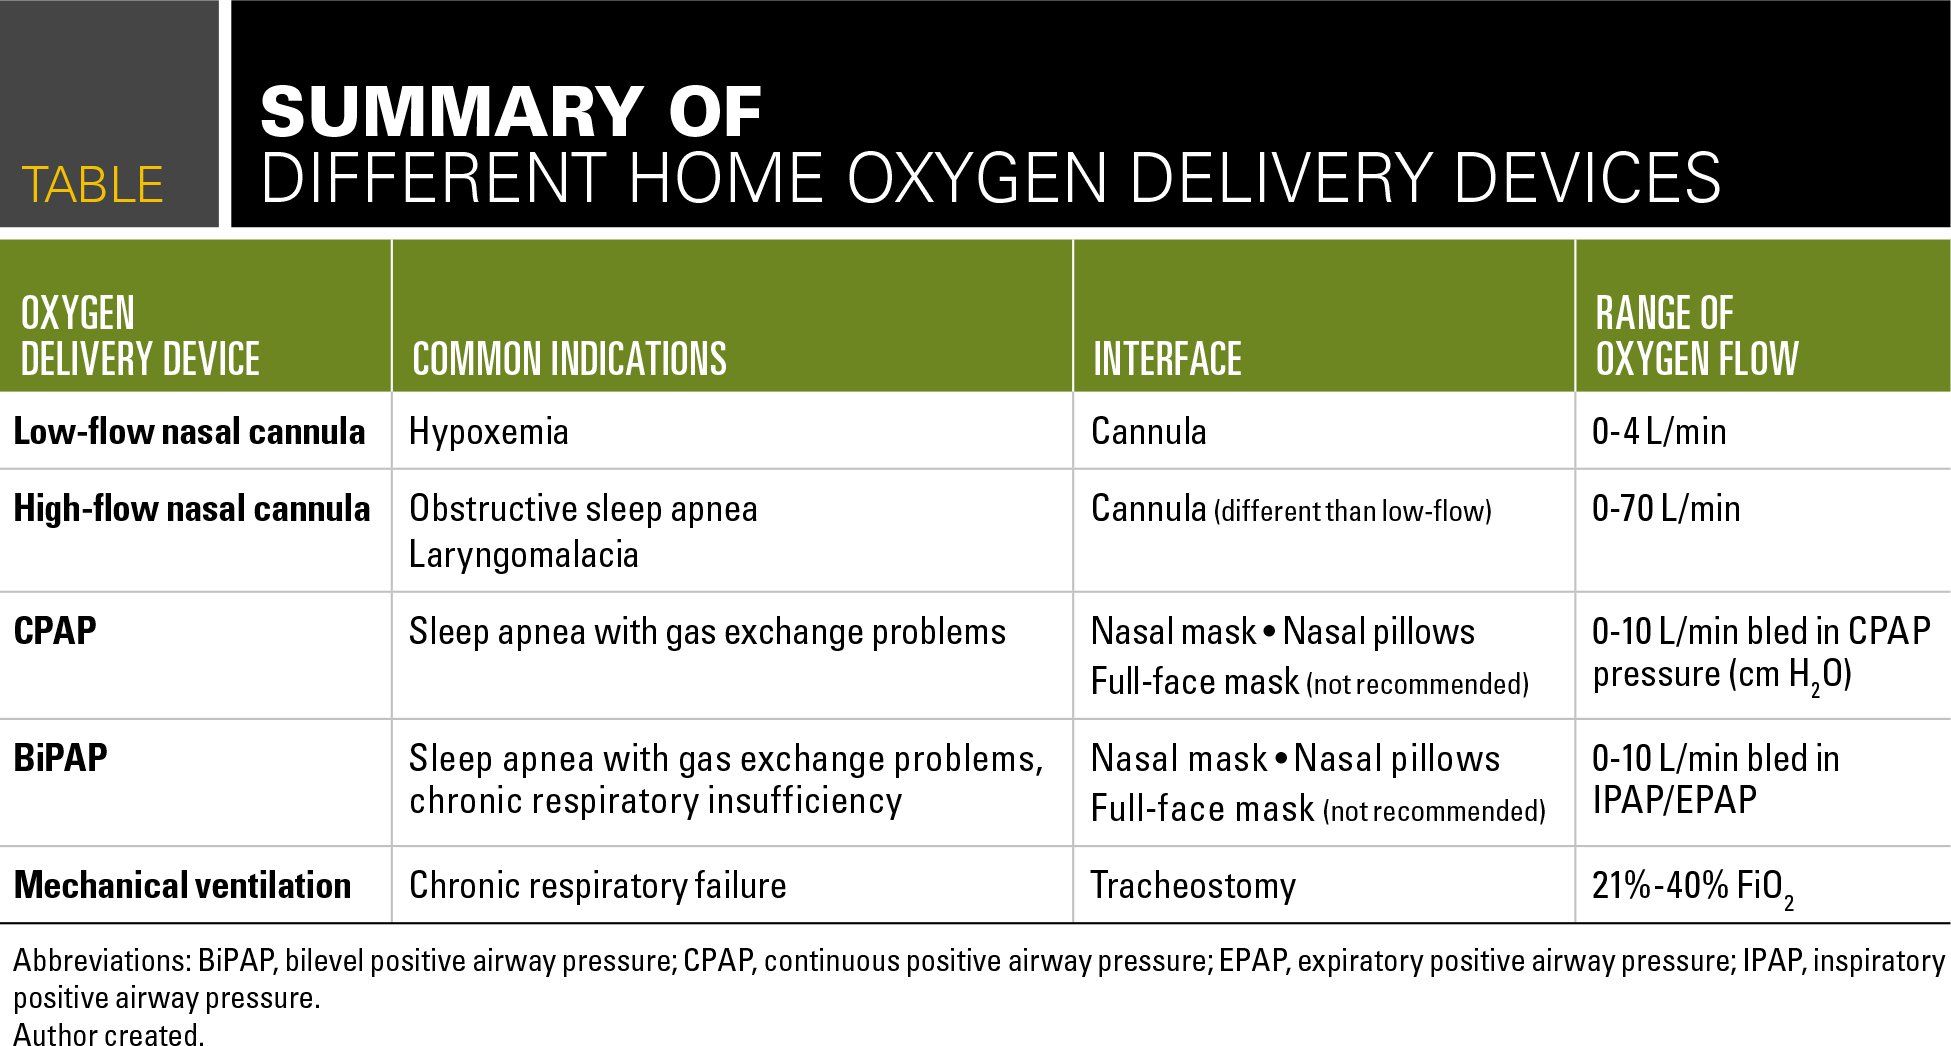 Oxygen delivery in the home setting